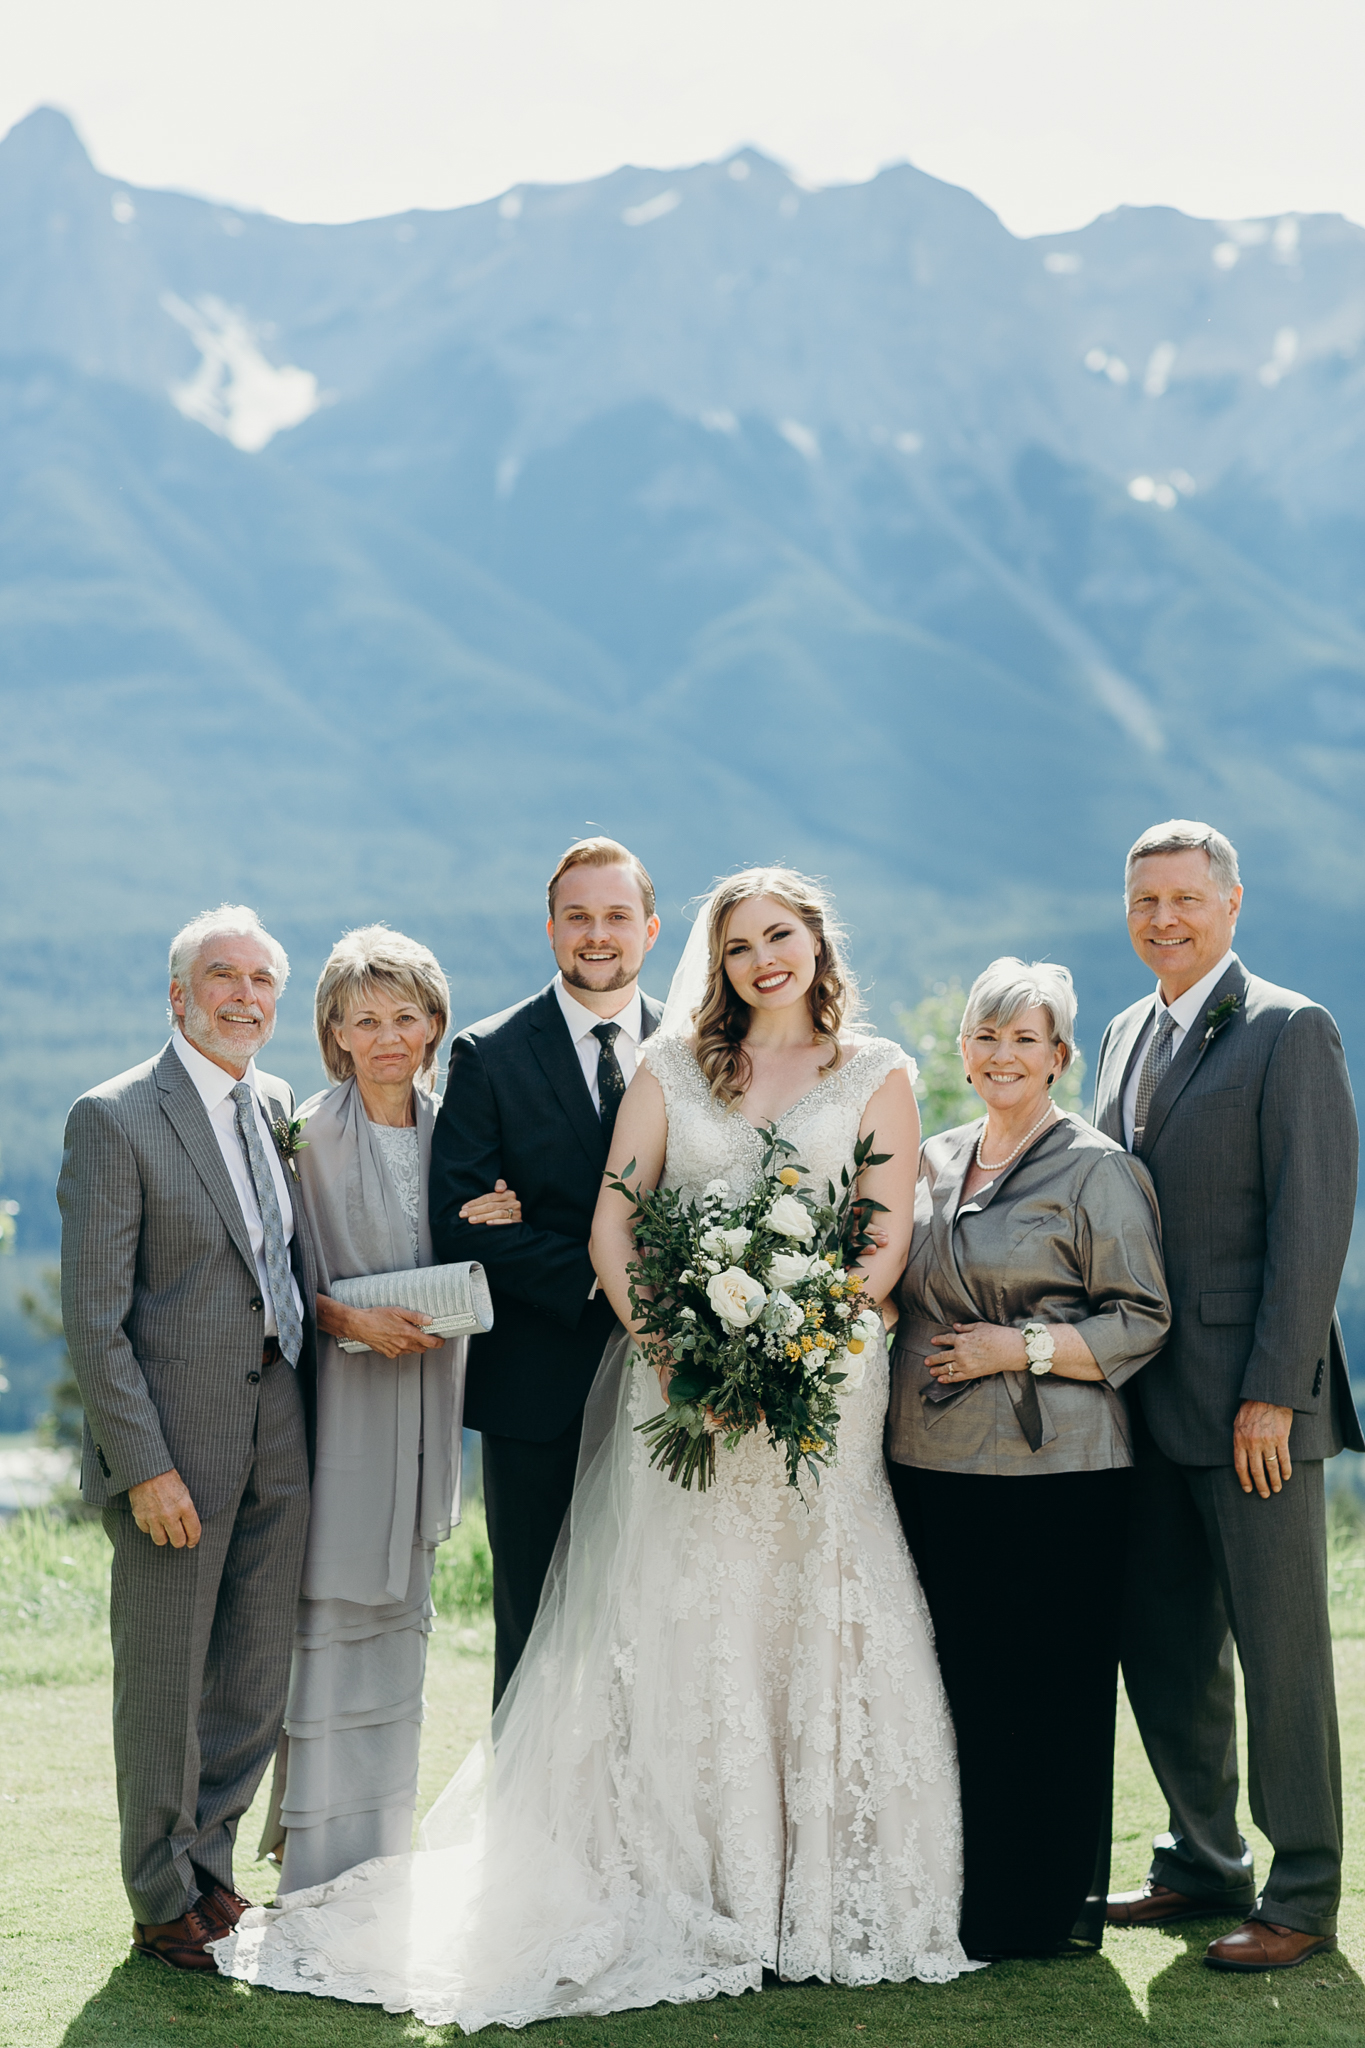 Family photo at Silvertip Resort destination wedding Canmore AB